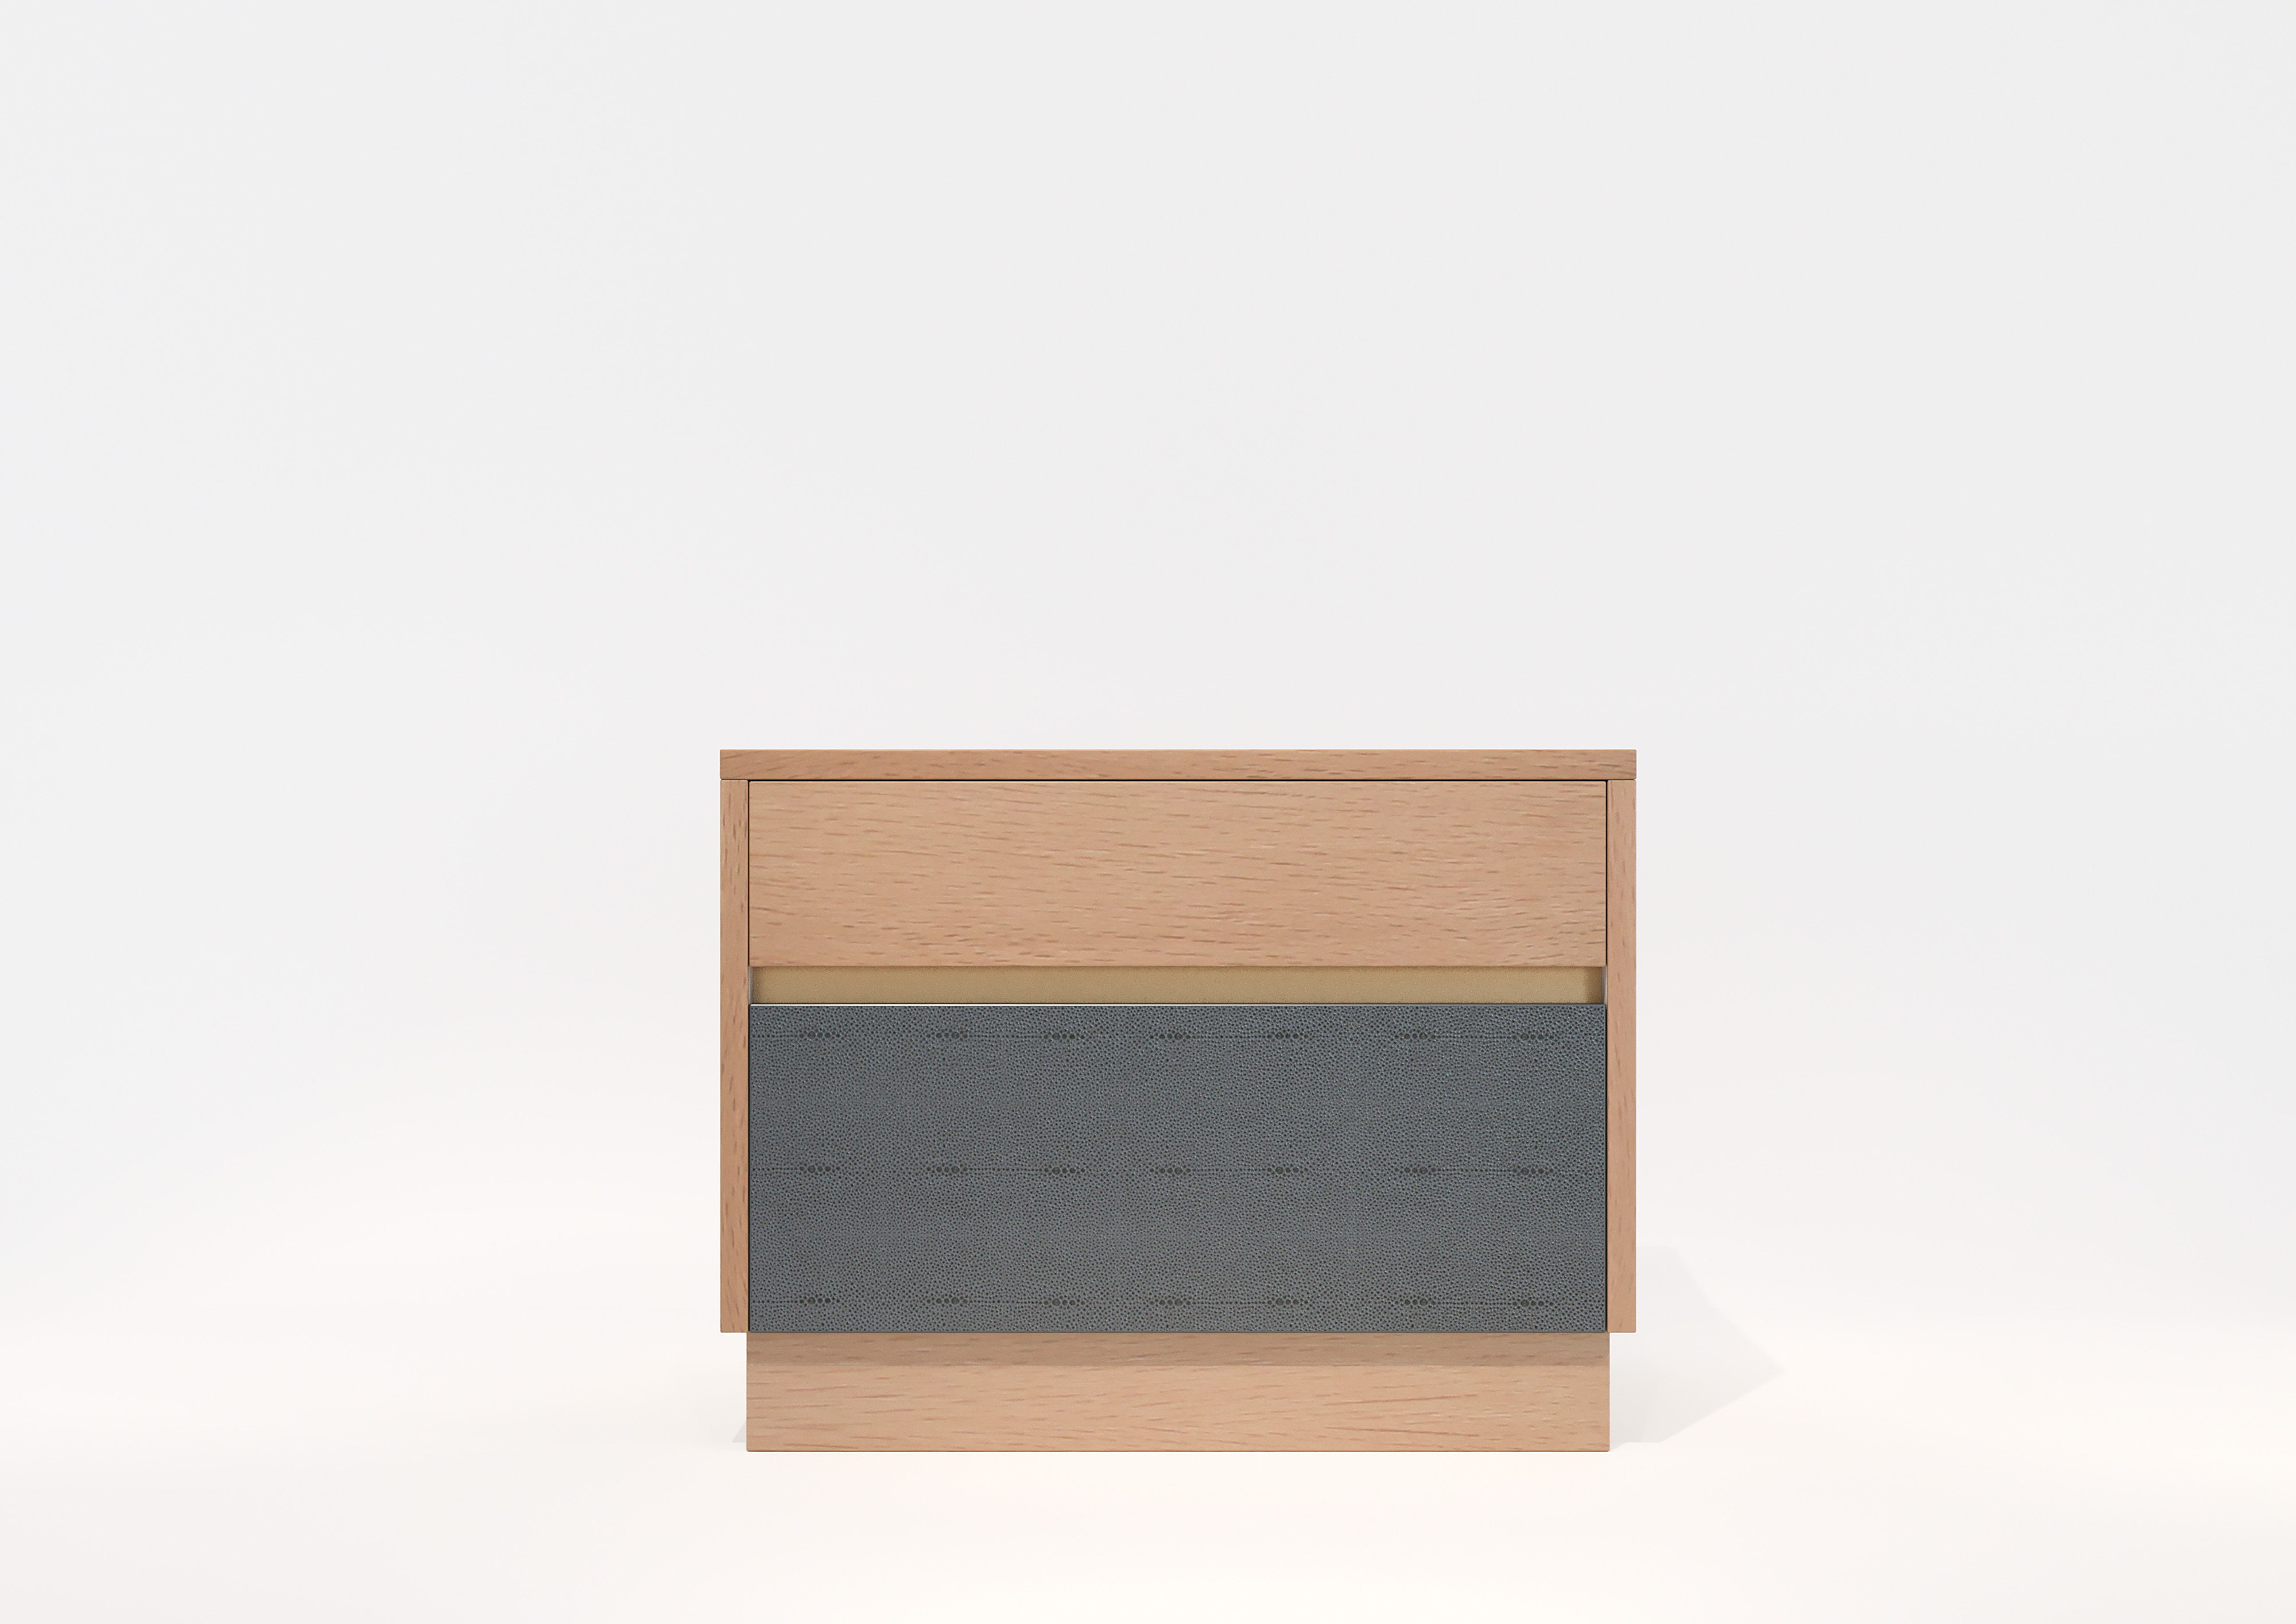 Downing Nightstand V2 Wood Edition #05 – $3,255.00